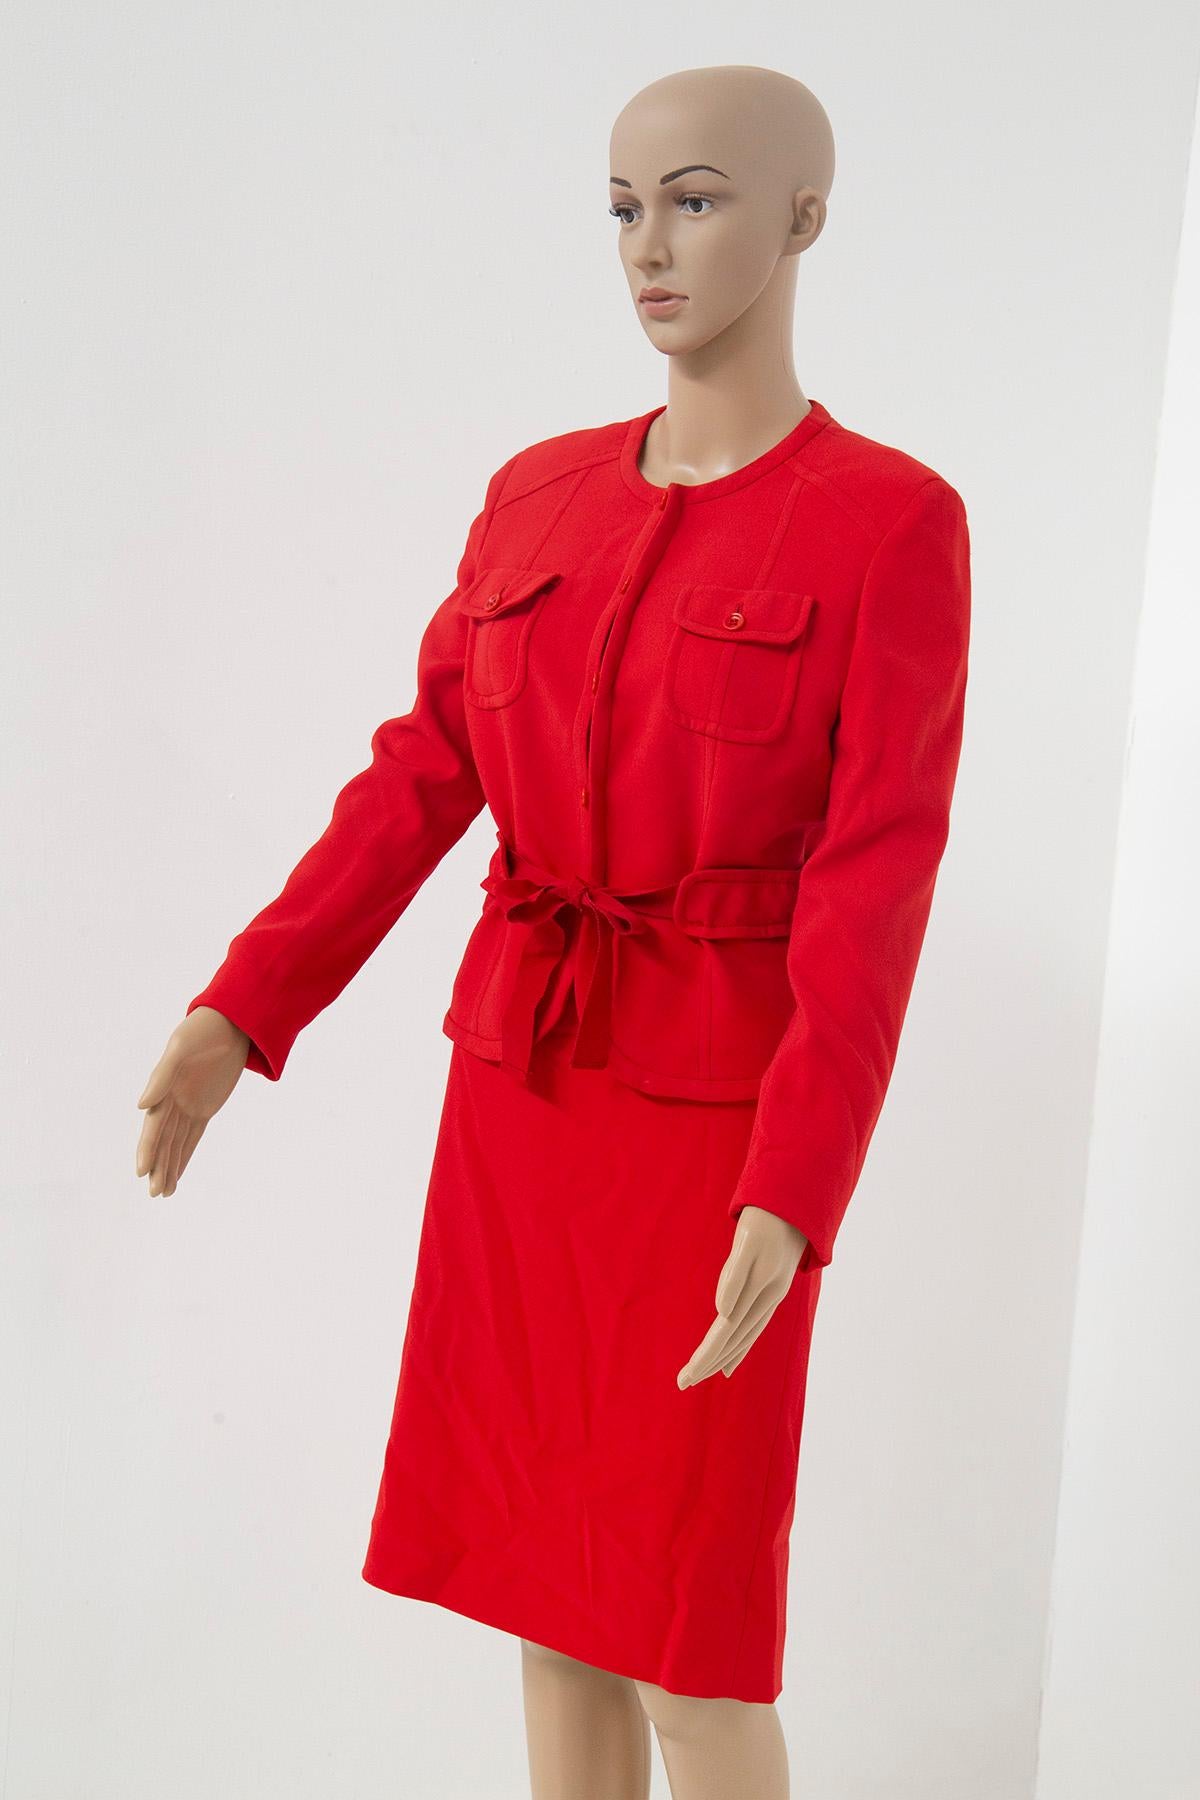 In the realm of vintage fashion, a true masterpiece emerges: an elegant Valentino pantsuit in the iconic shade of red, a symbol of passion and timeless appeal. This ensemble, made in the 1990s, is a testament to Valentino's enduring legacy of